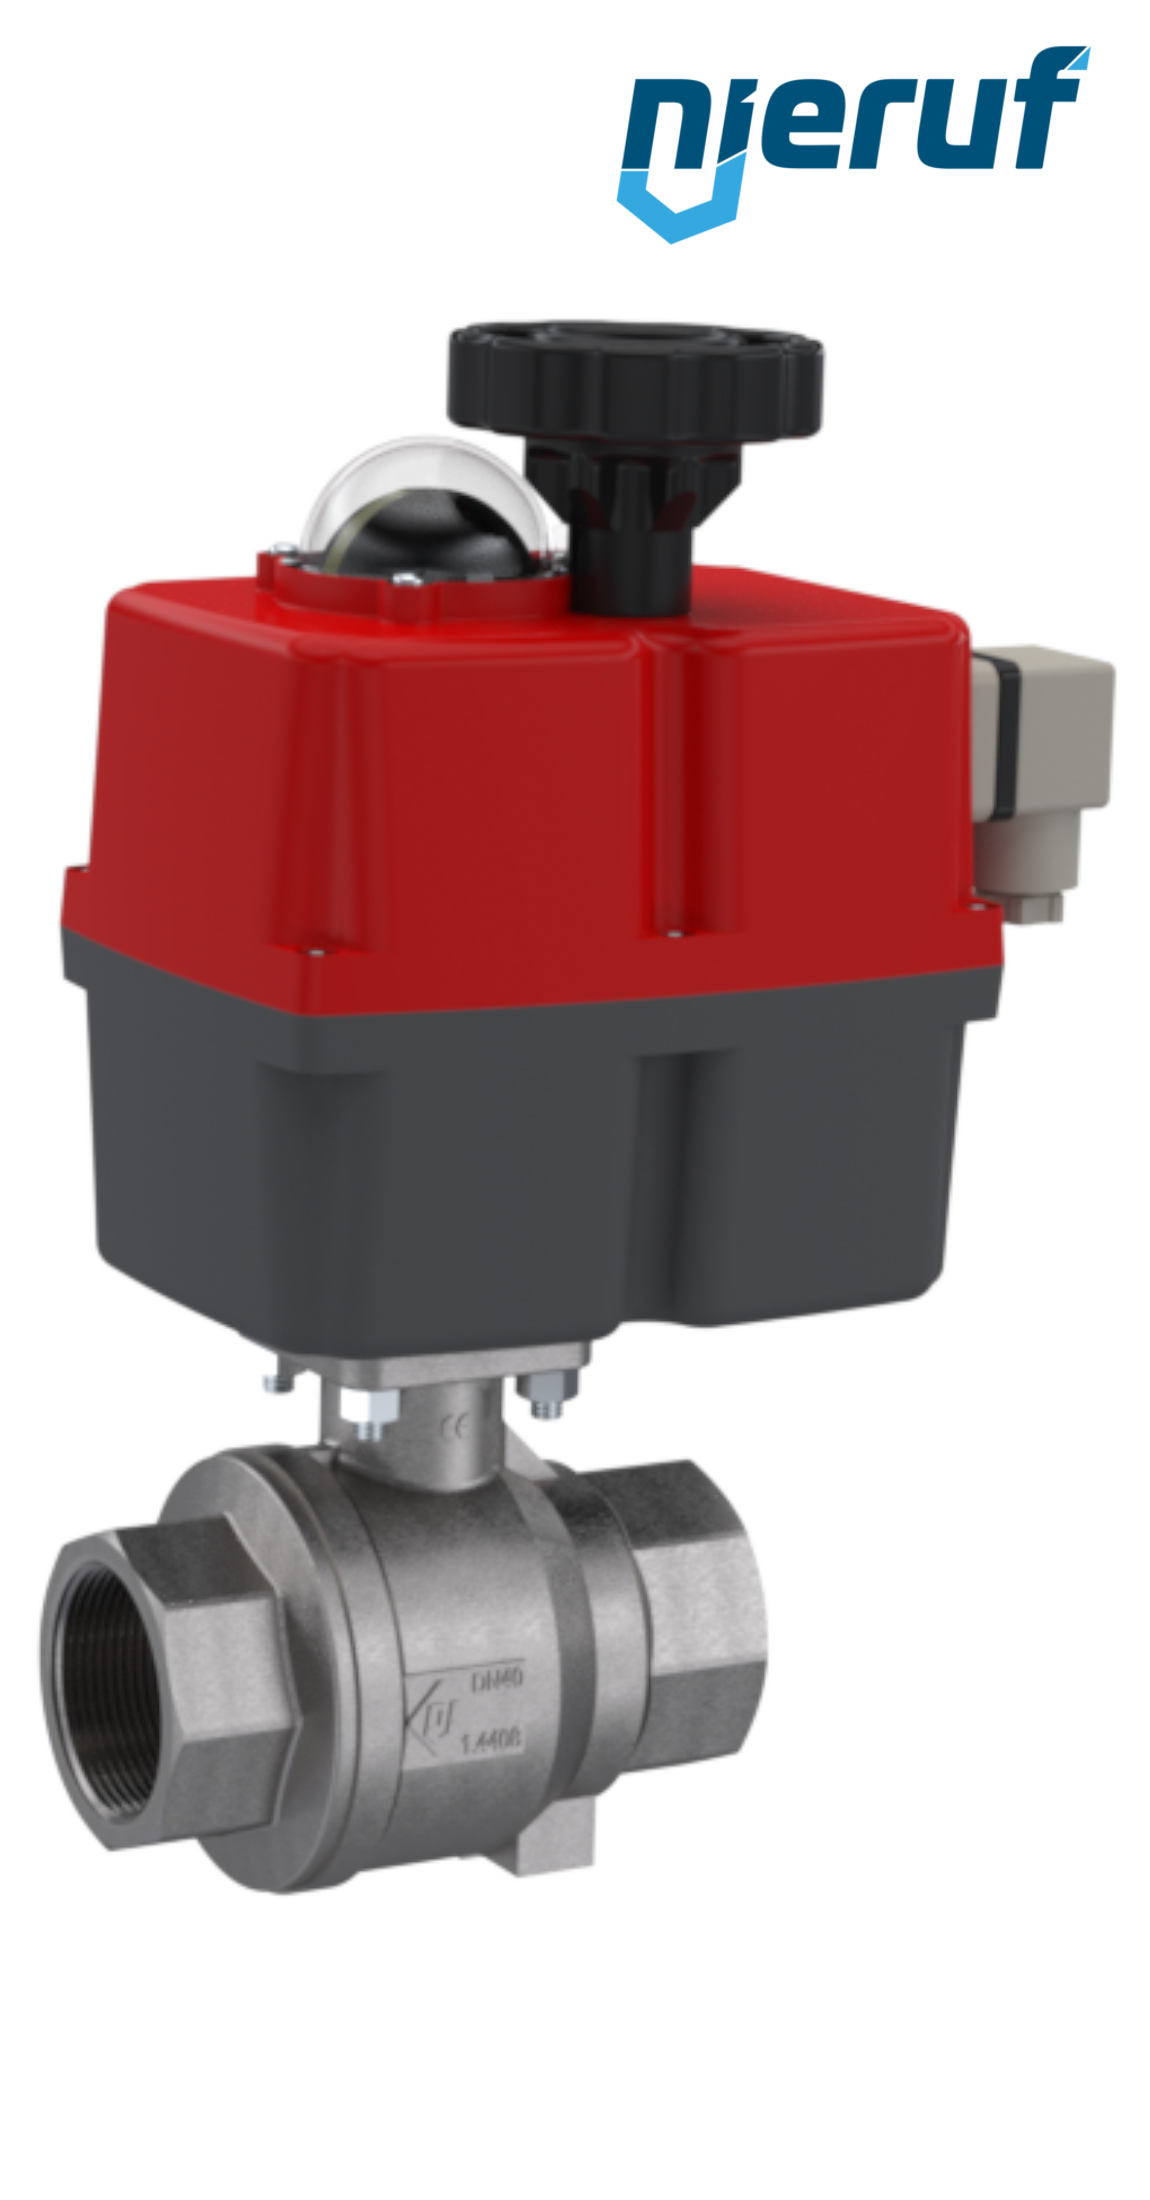 automatic-ball valve DN50 - 2" inch stainless steel electric 24V EK02